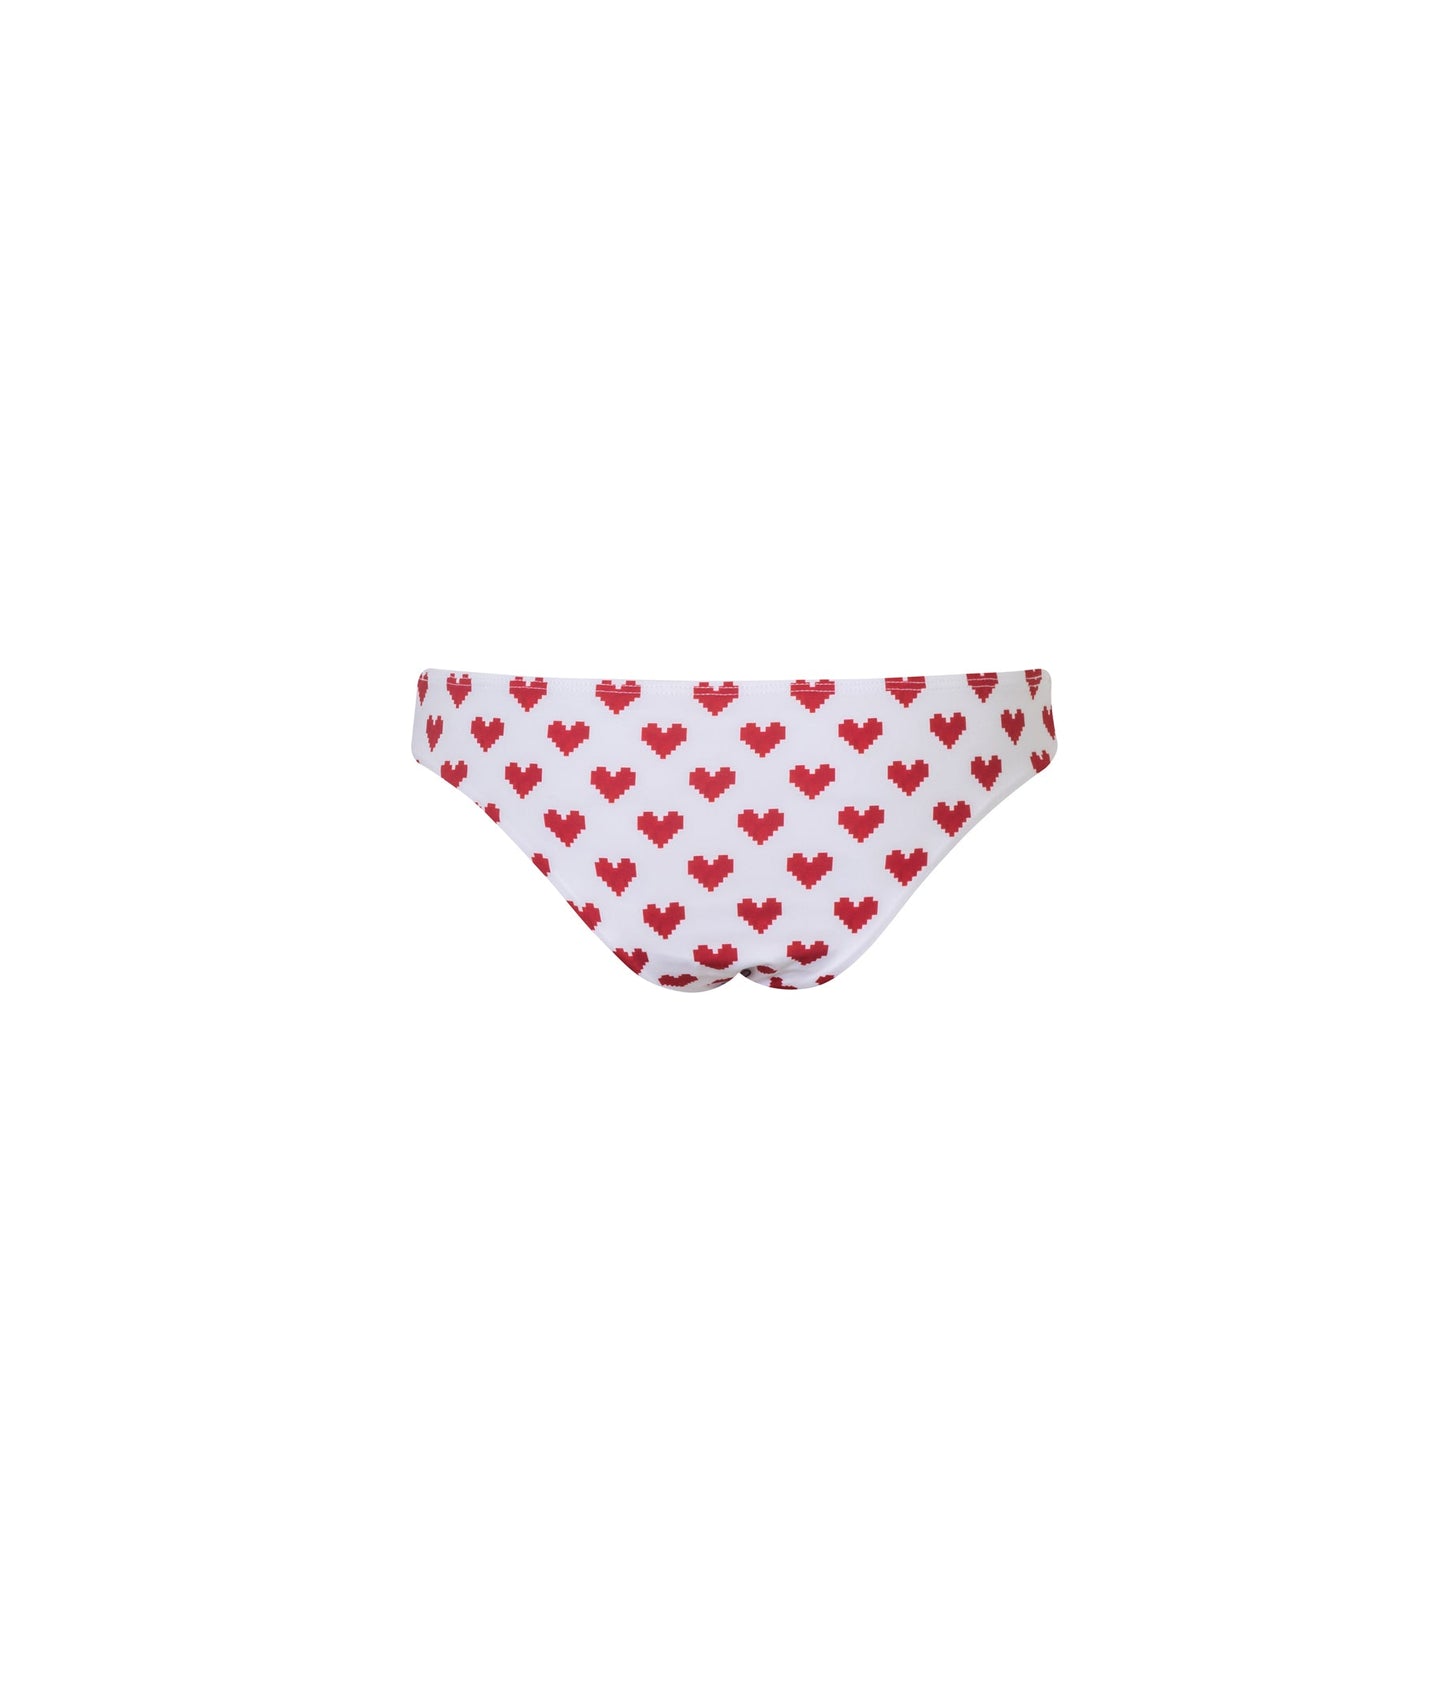 Verdelimon - Bottoms - Tunas -  Dreamland - Red Pixel Hearts - Back